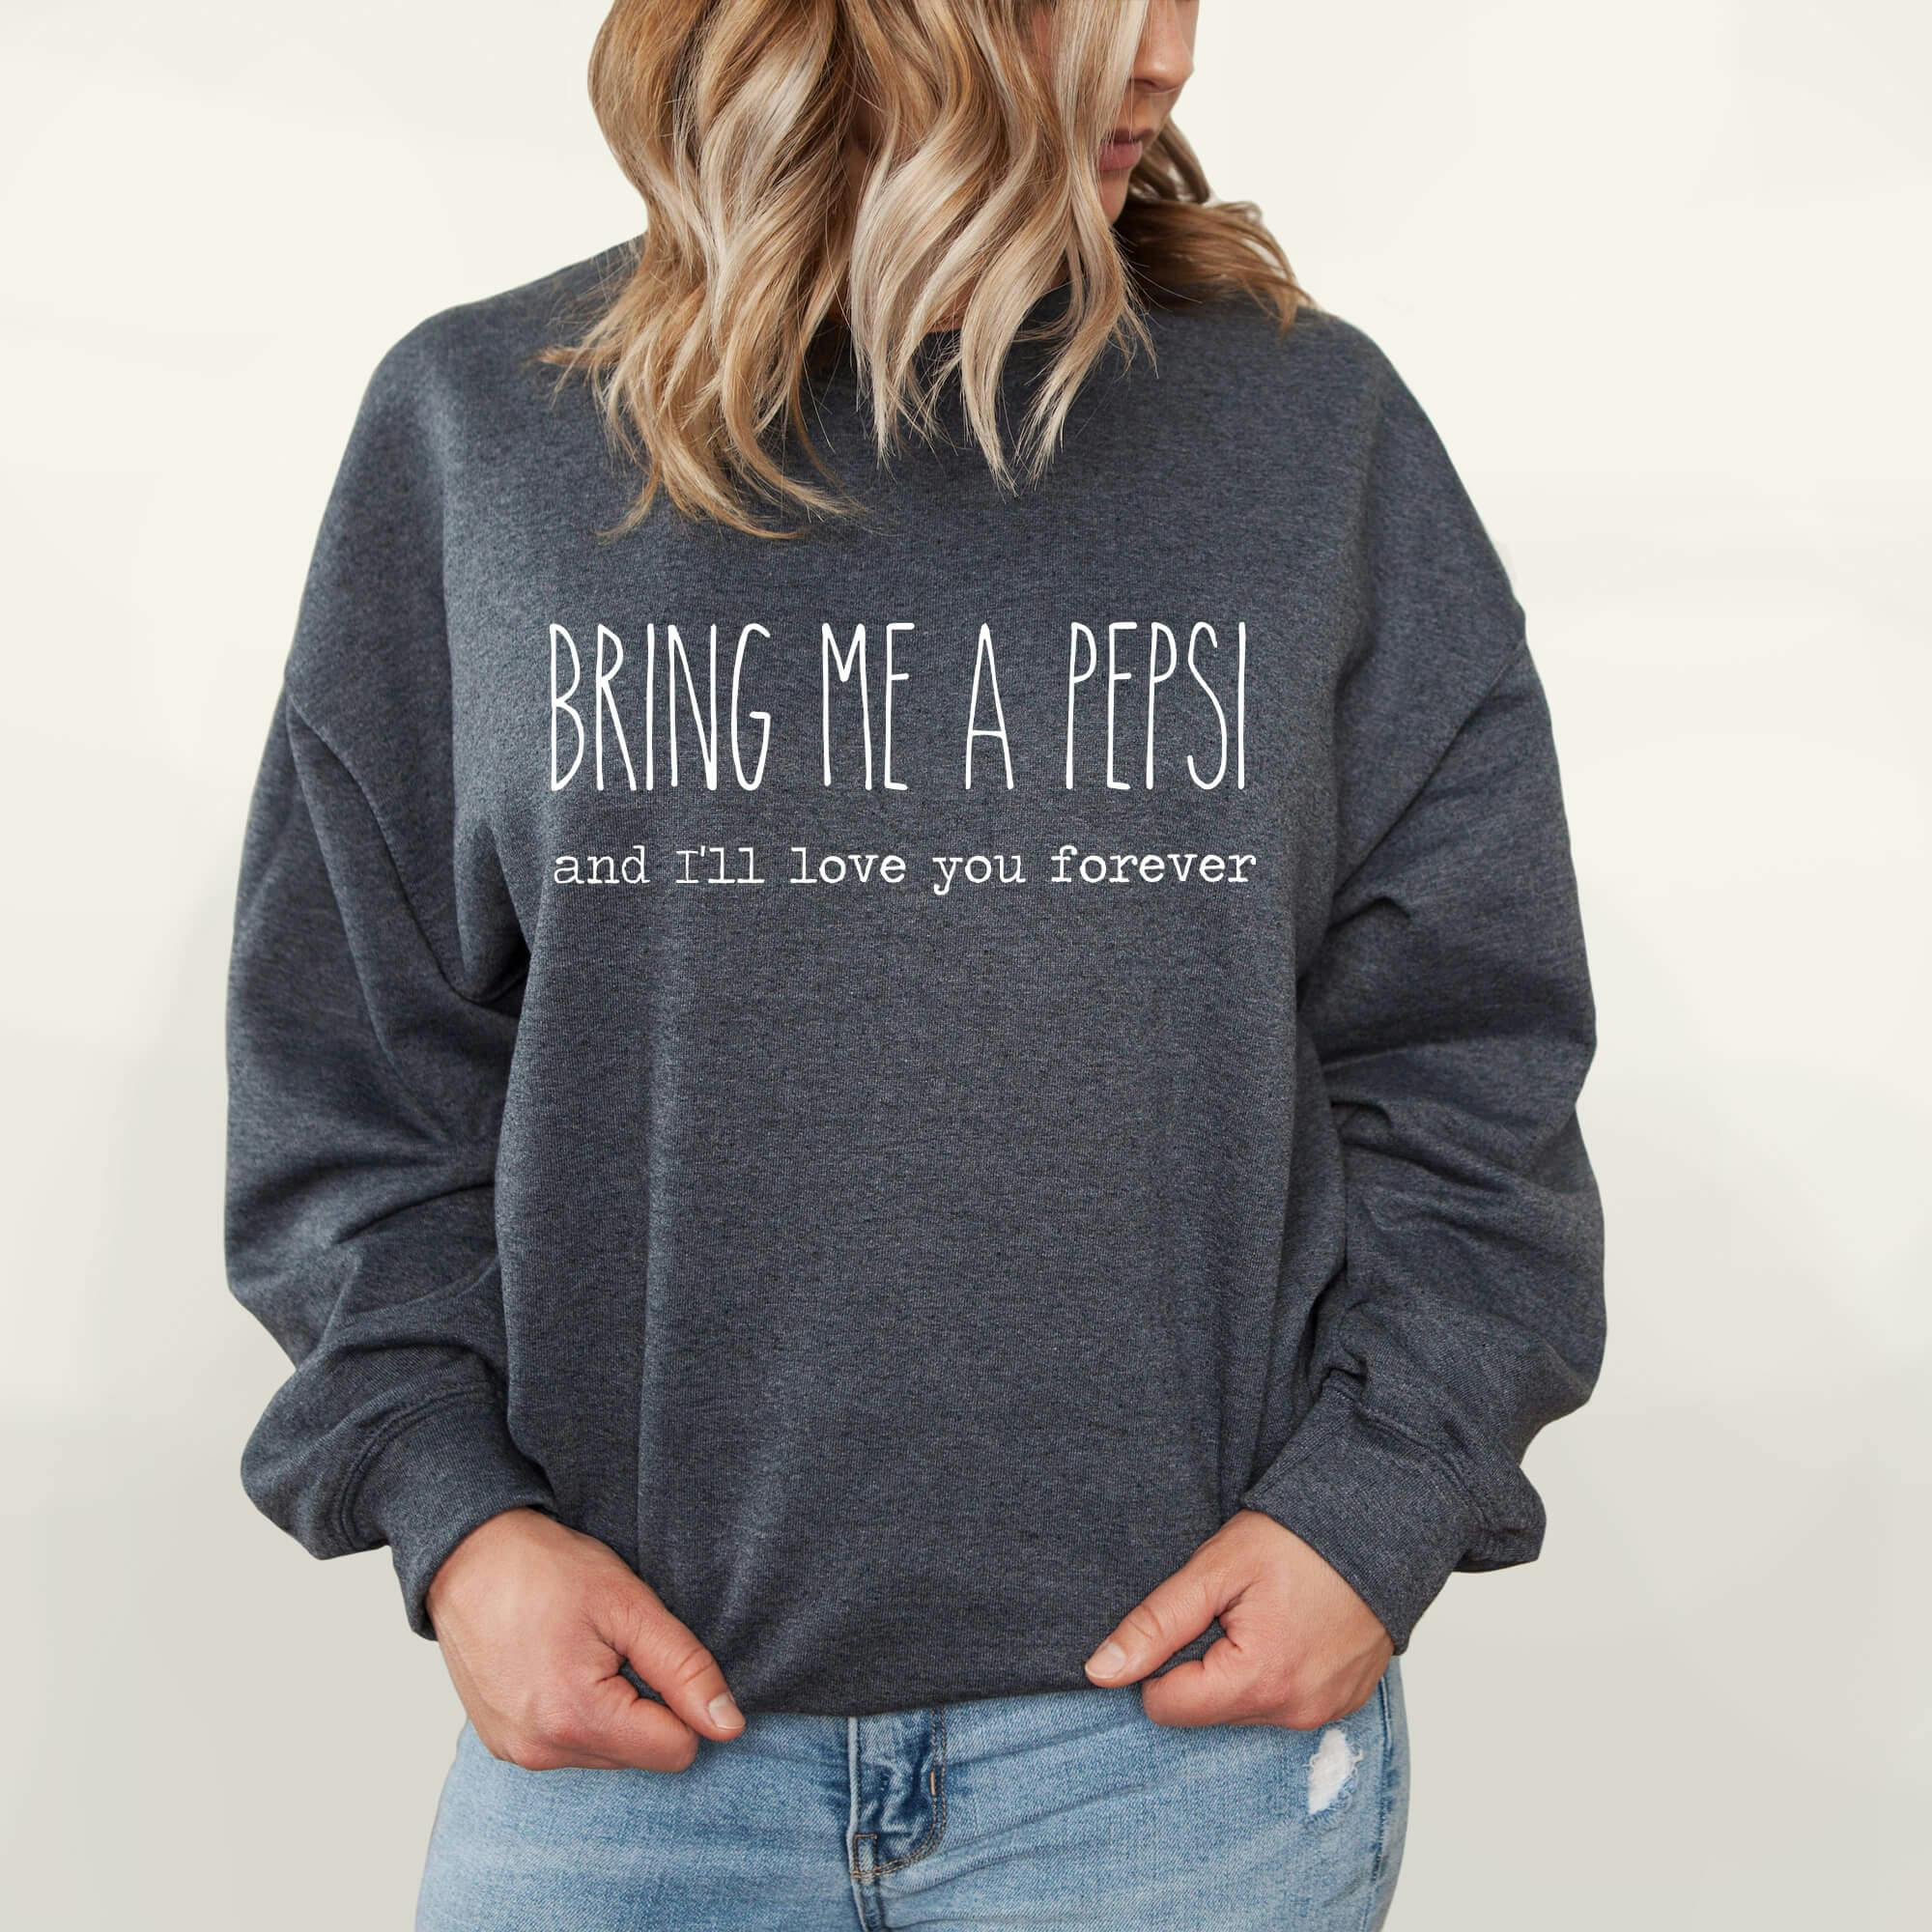 Bring Me A Pepsi And I'll Love You Forever Sweatshirt | Fleece Lined Pullover | Caffeine Lover | Soda Tees | Popular Graphic | Caffeinated Drinks - undefined - BEADSBEE BOUTIQUE